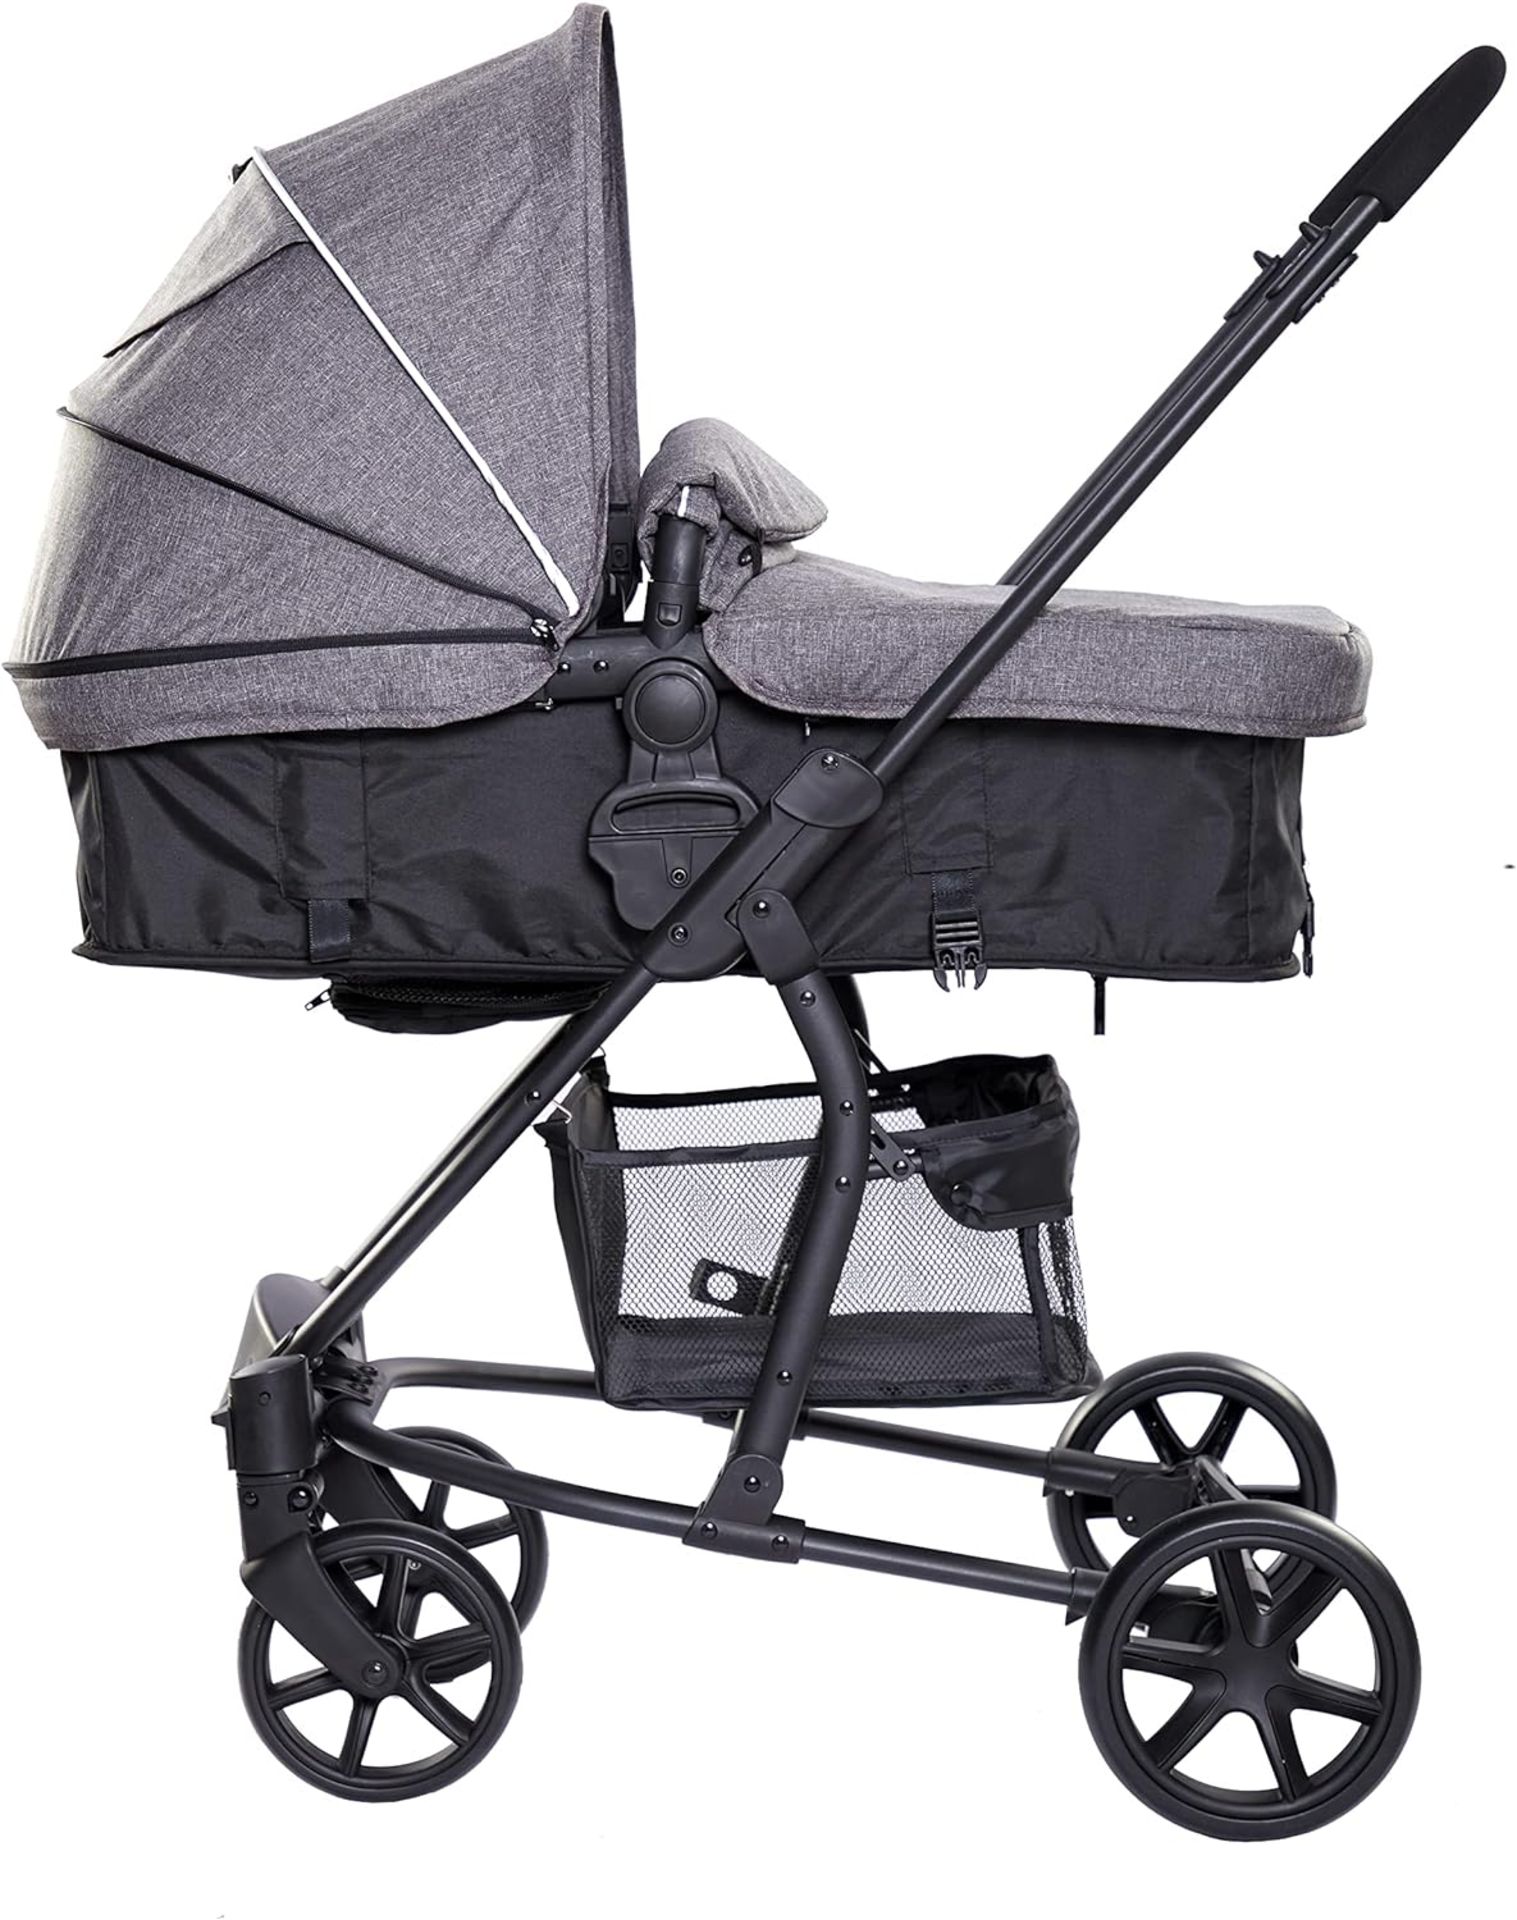 TRADE LOT 10 x NEW & BOXED RICCO Baby 2-in-1 Foldable Buggy Stroller Pushchair with Reversible seat, - Image 3 of 9